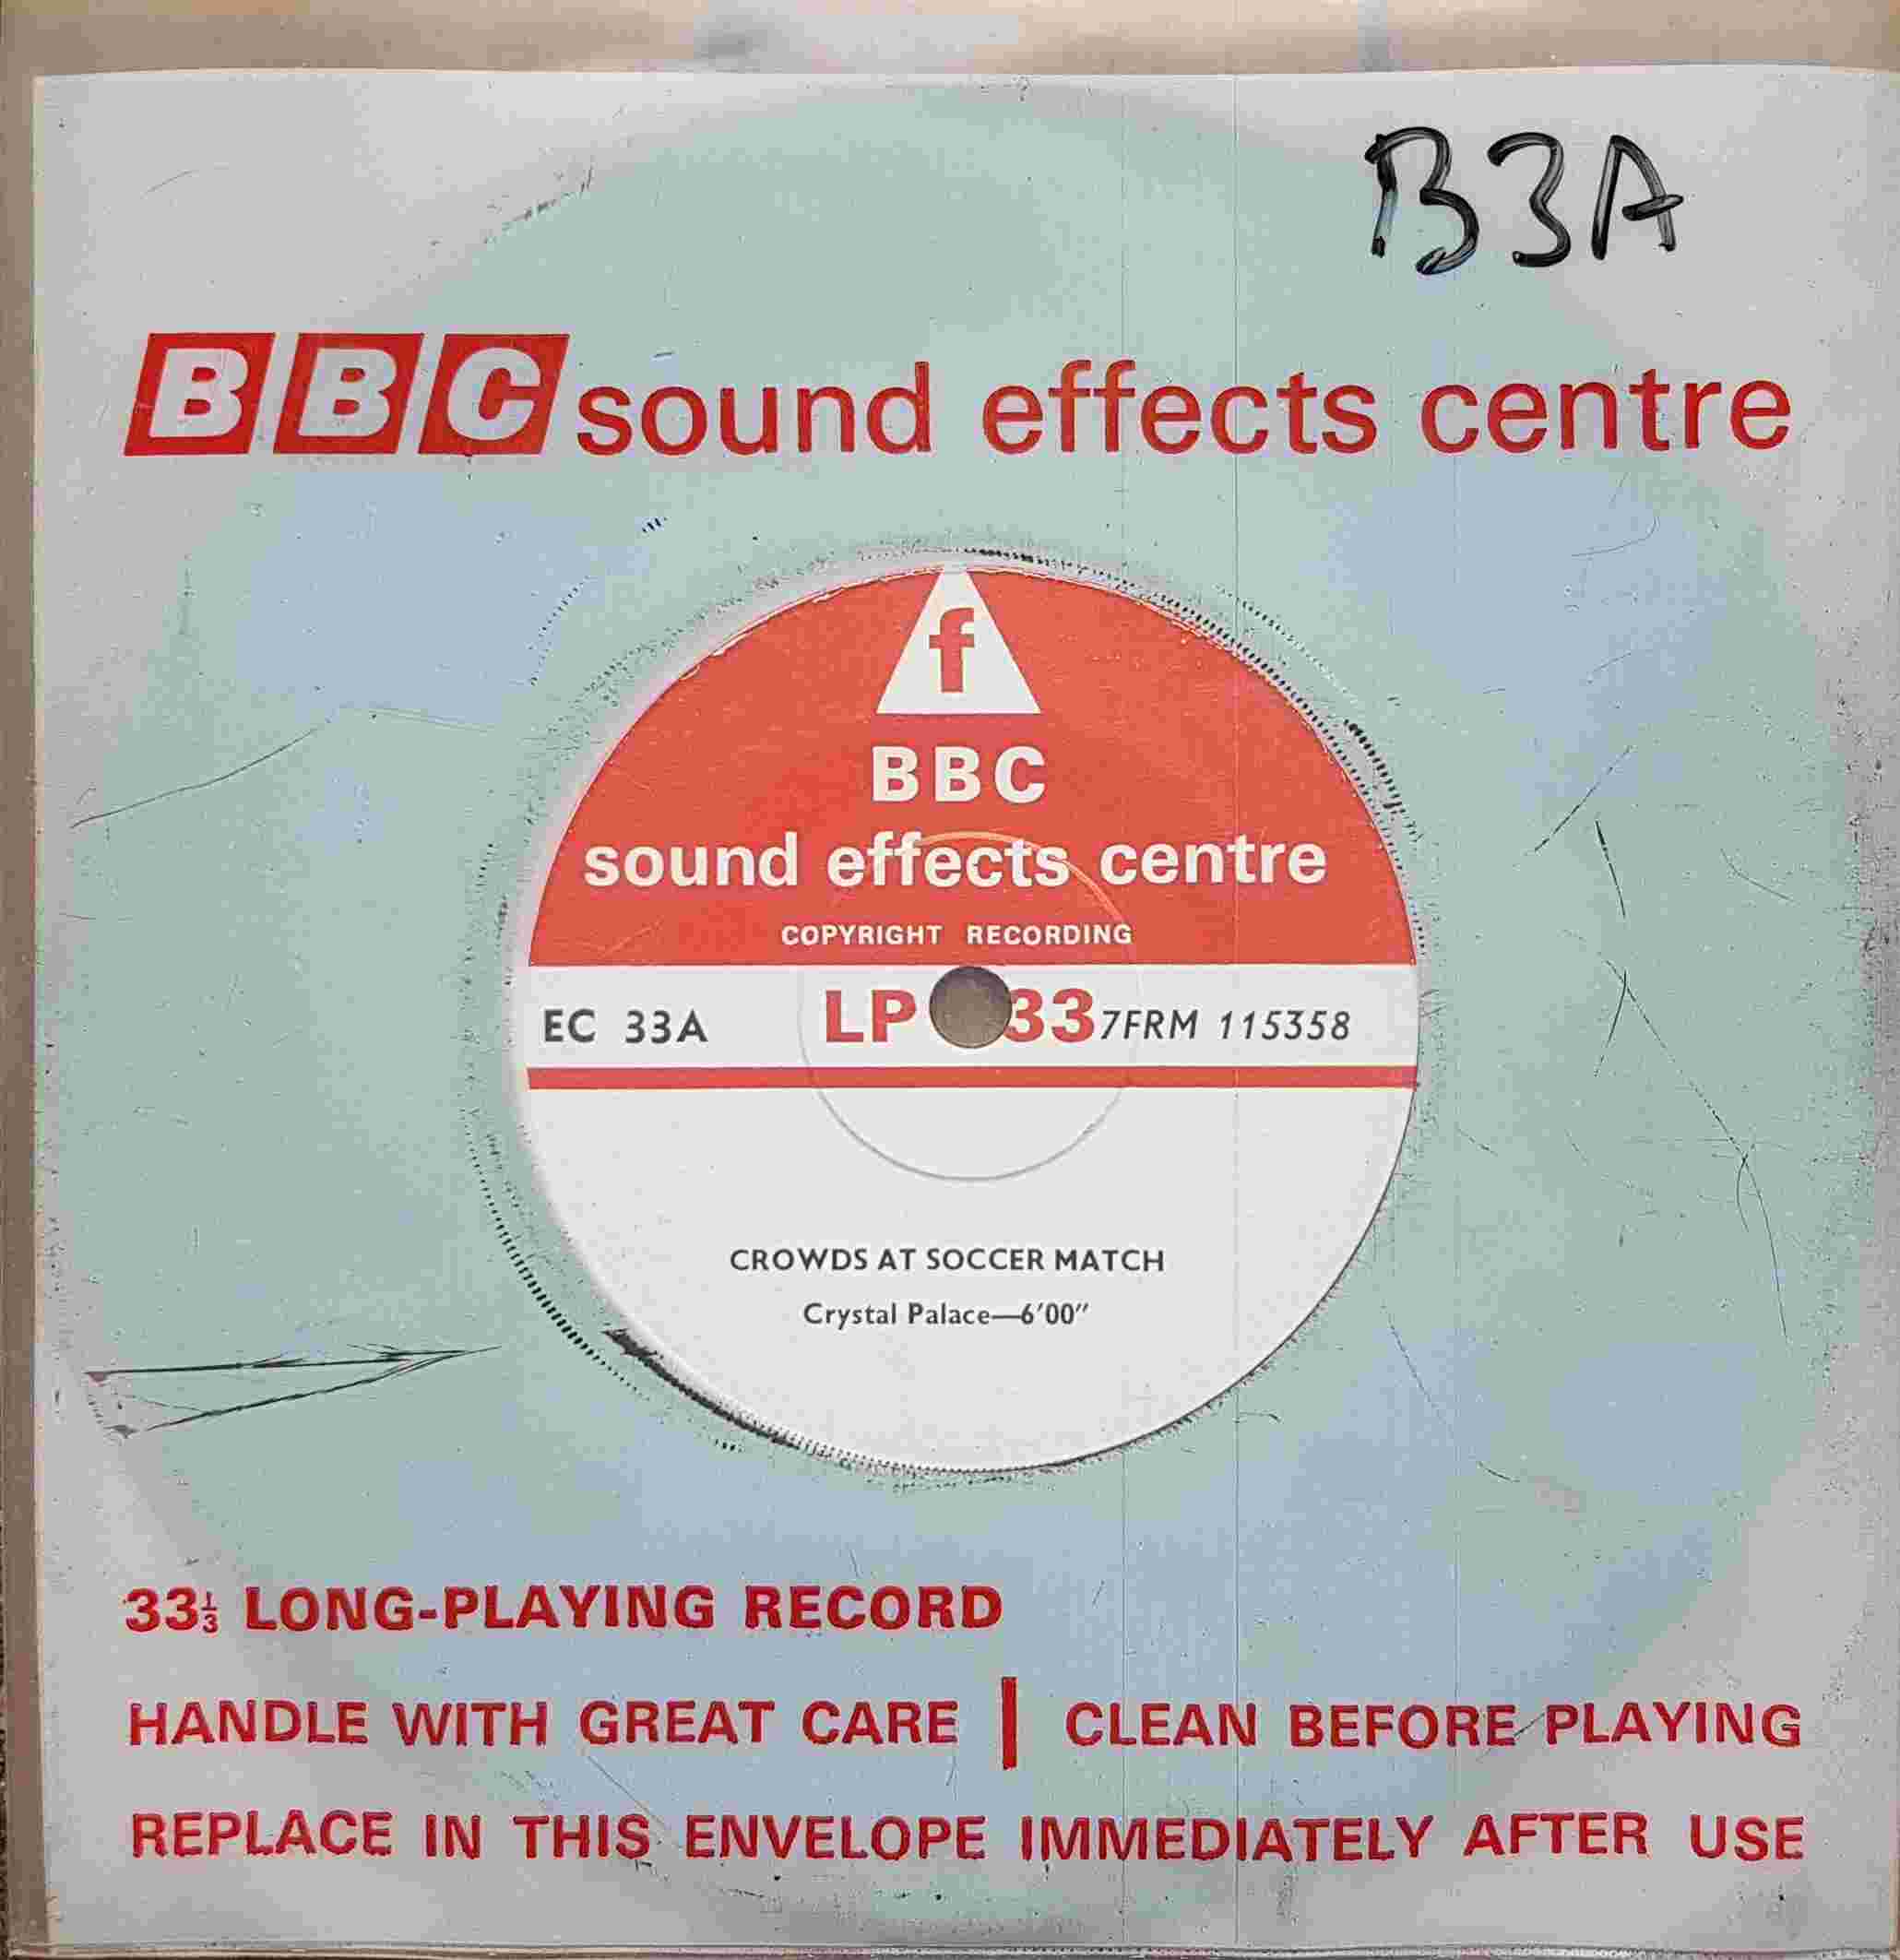 Picture of EC 33A Crowds by artist Not registered from the BBC singles - Records and Tapes library